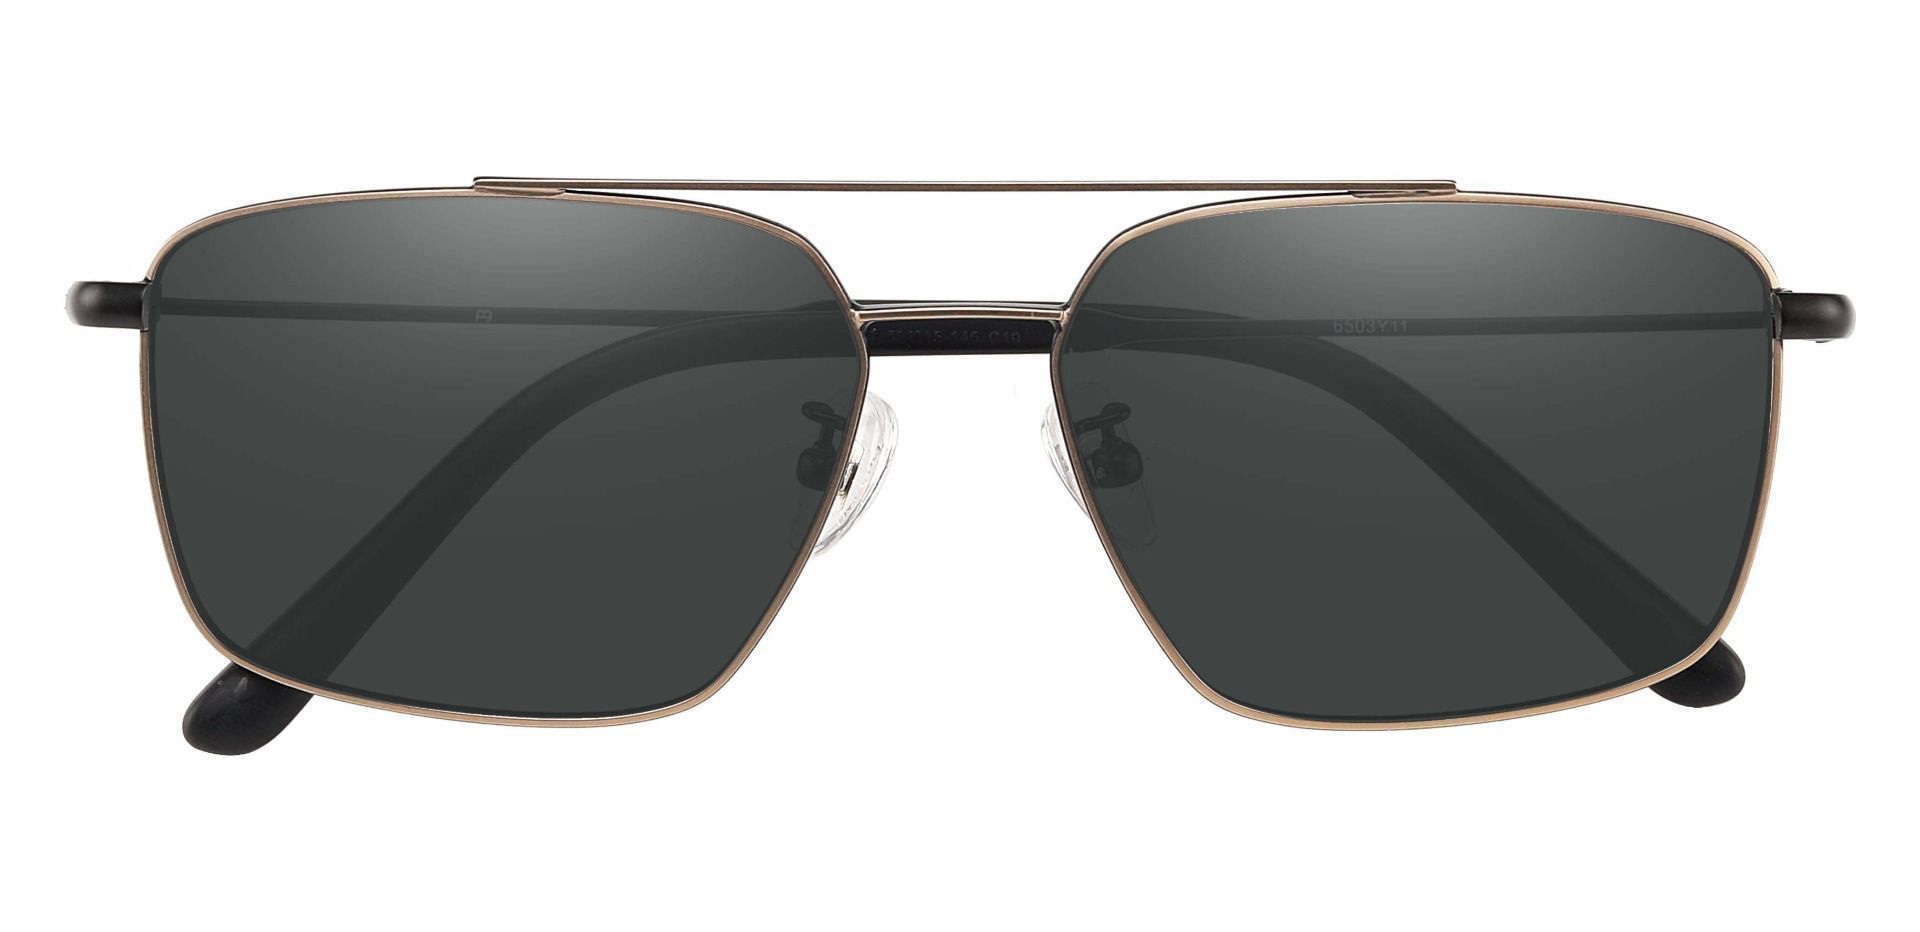 Barlow Aviator Non-Rx Sunglasses - Gold Frame With Gray Lenses